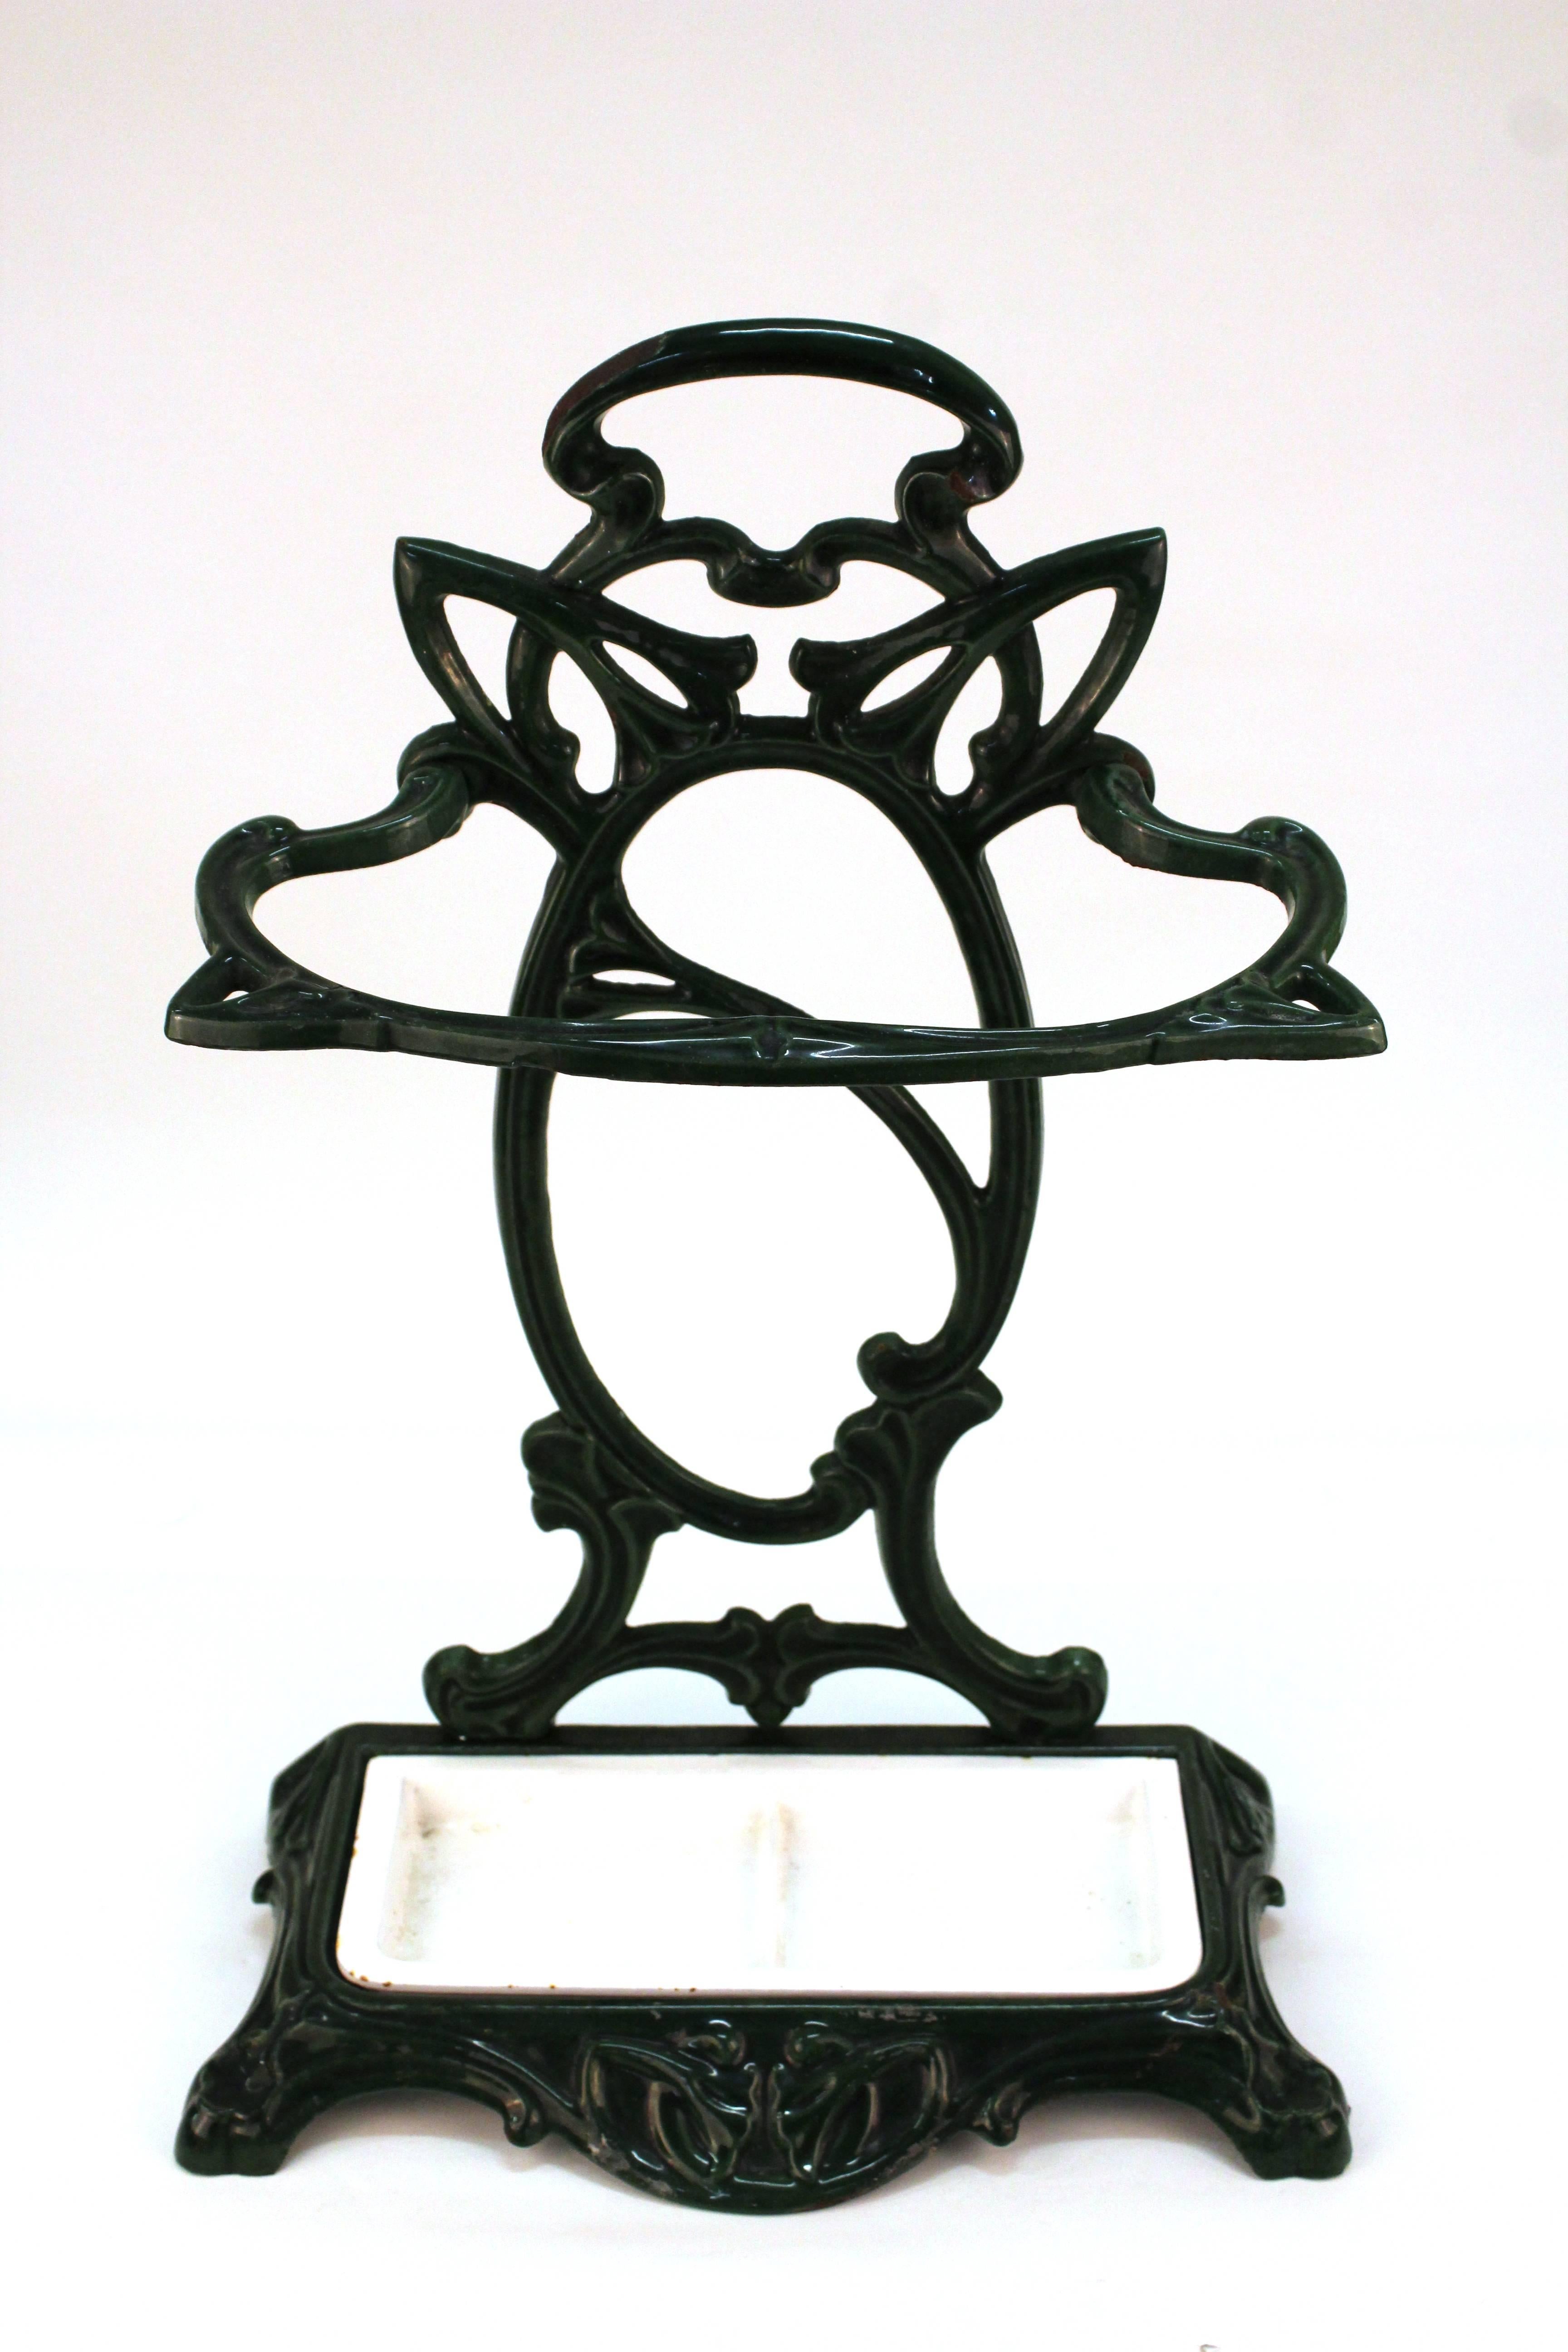 A French Art Nouveau umbrella stand in porcelain and cast iron, with original inserts, made in France by Castirone. Inserts crafted in white porcelain over cast iron. Great vintage condition.